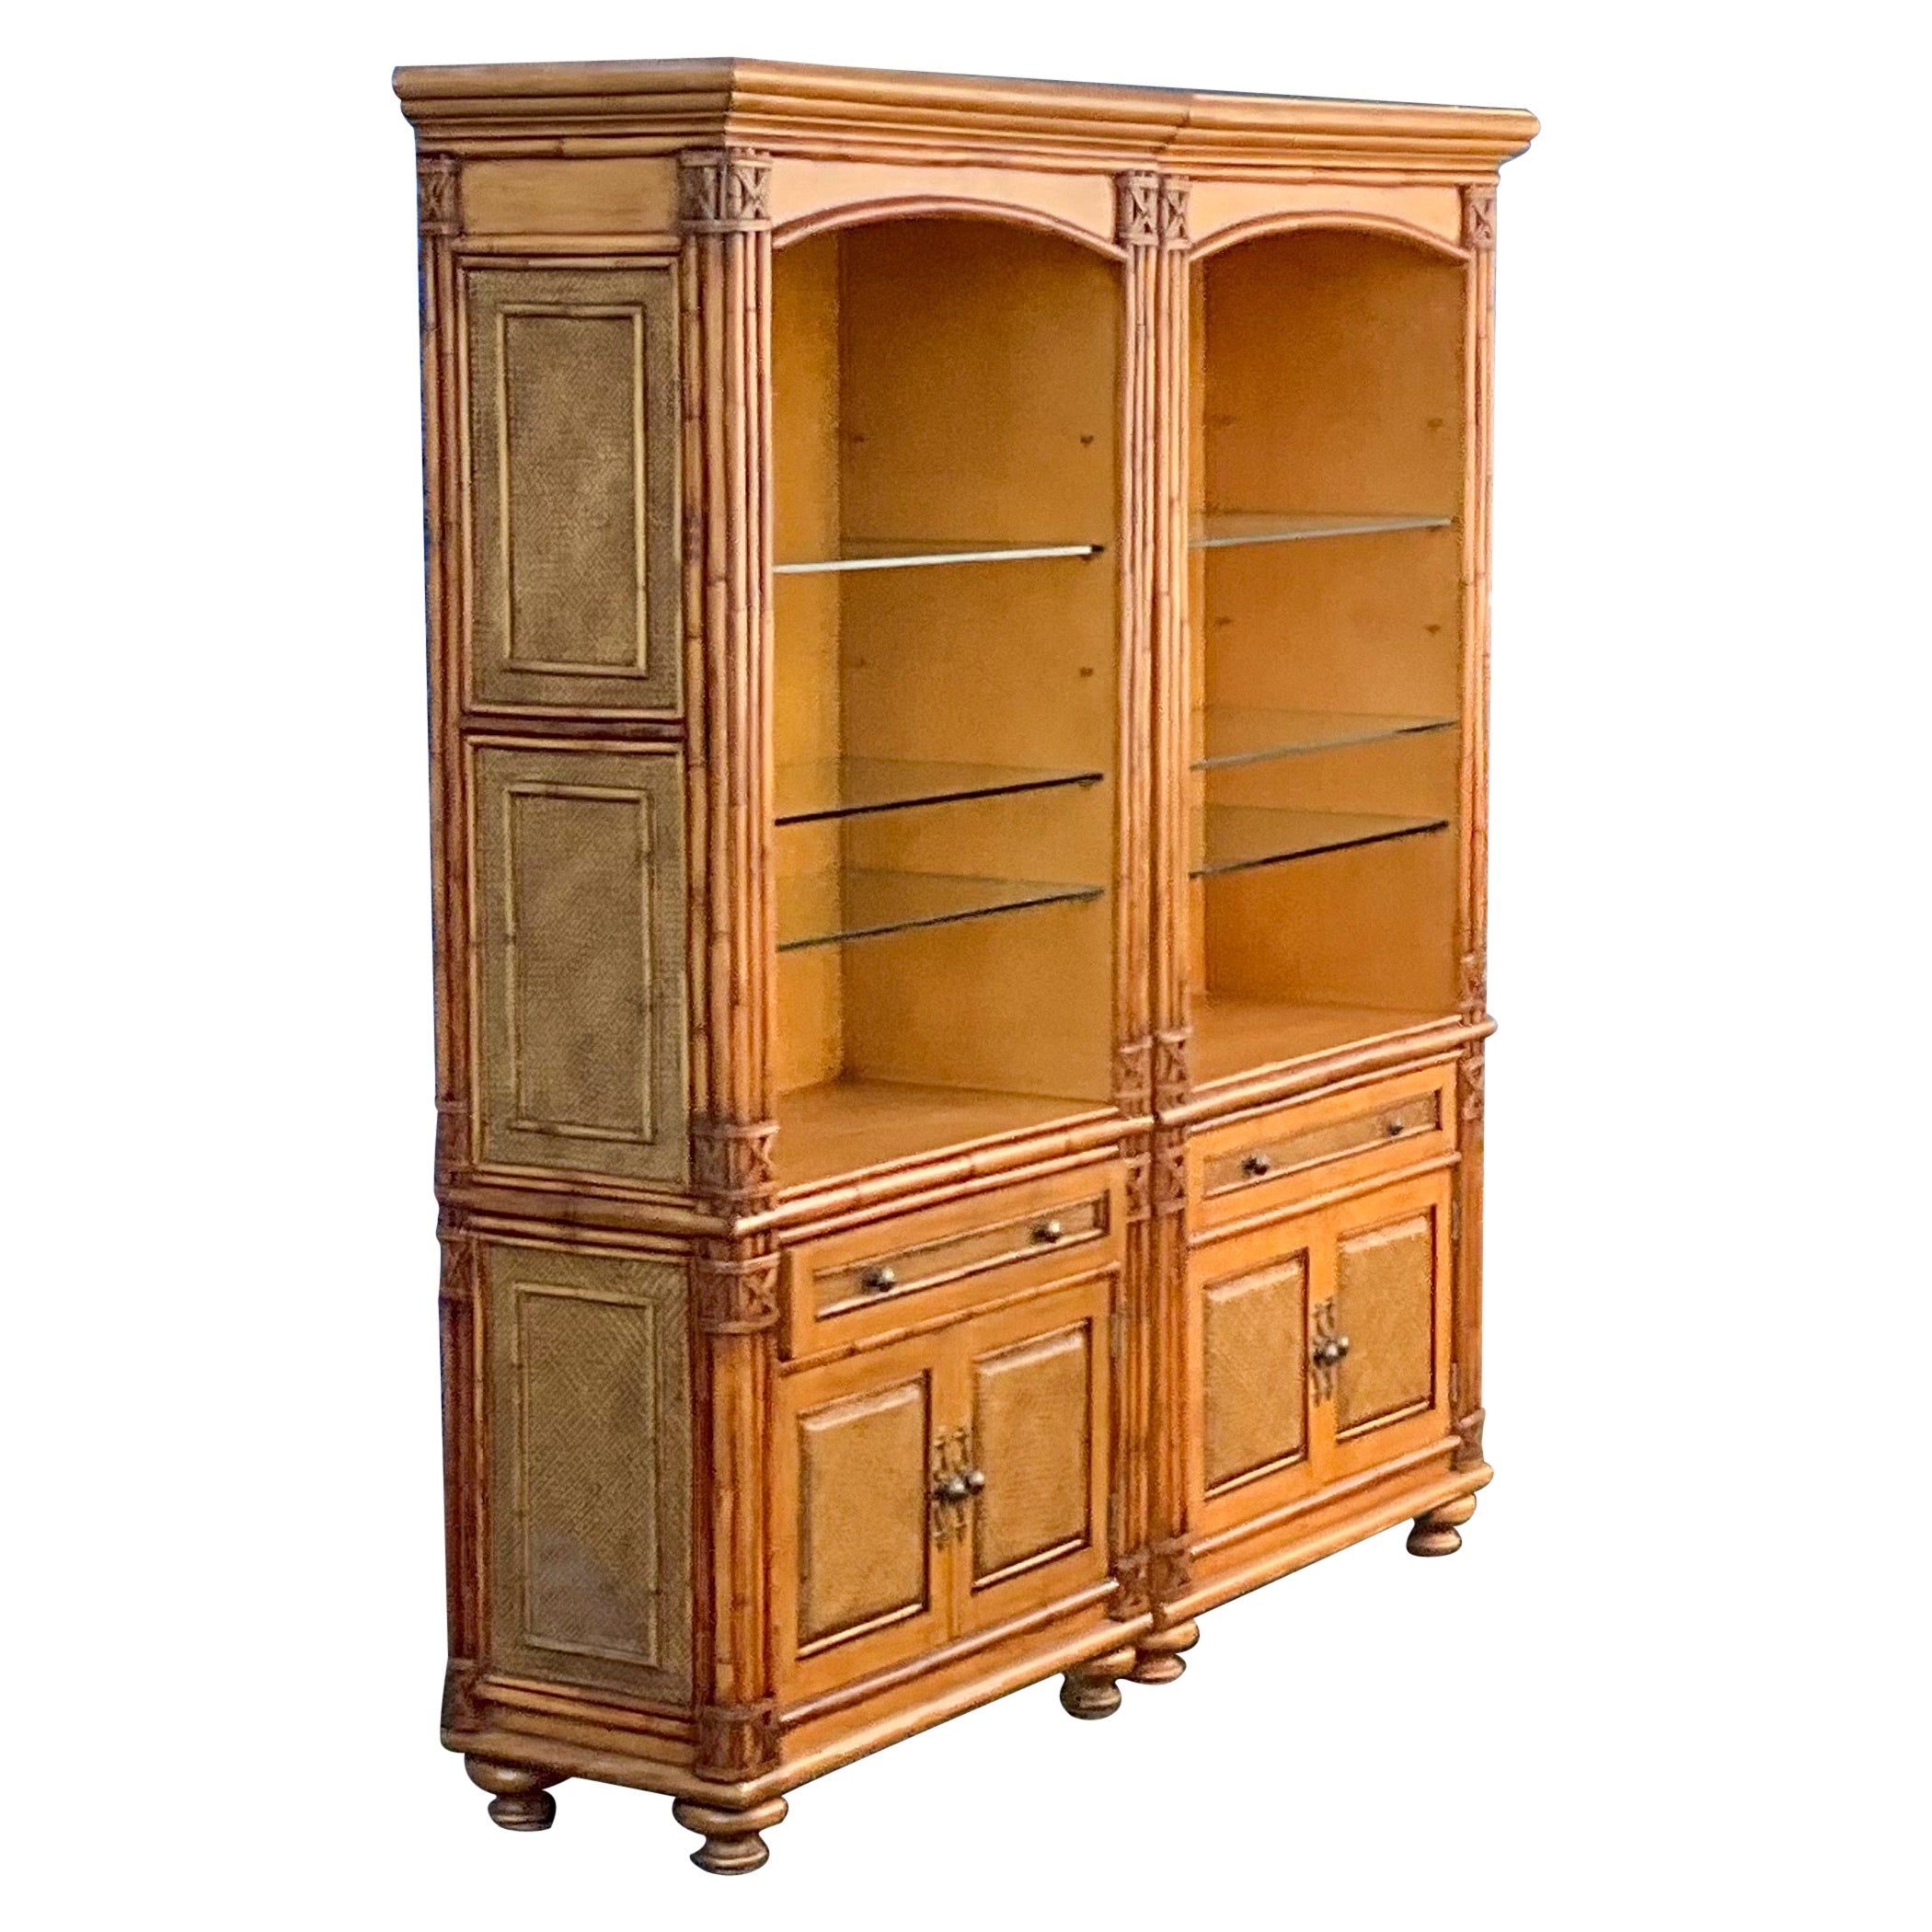 Regency Coastal Style Faux Bamboo Fruitwood Bookcases / Display Cabinets - S/2 For Sale